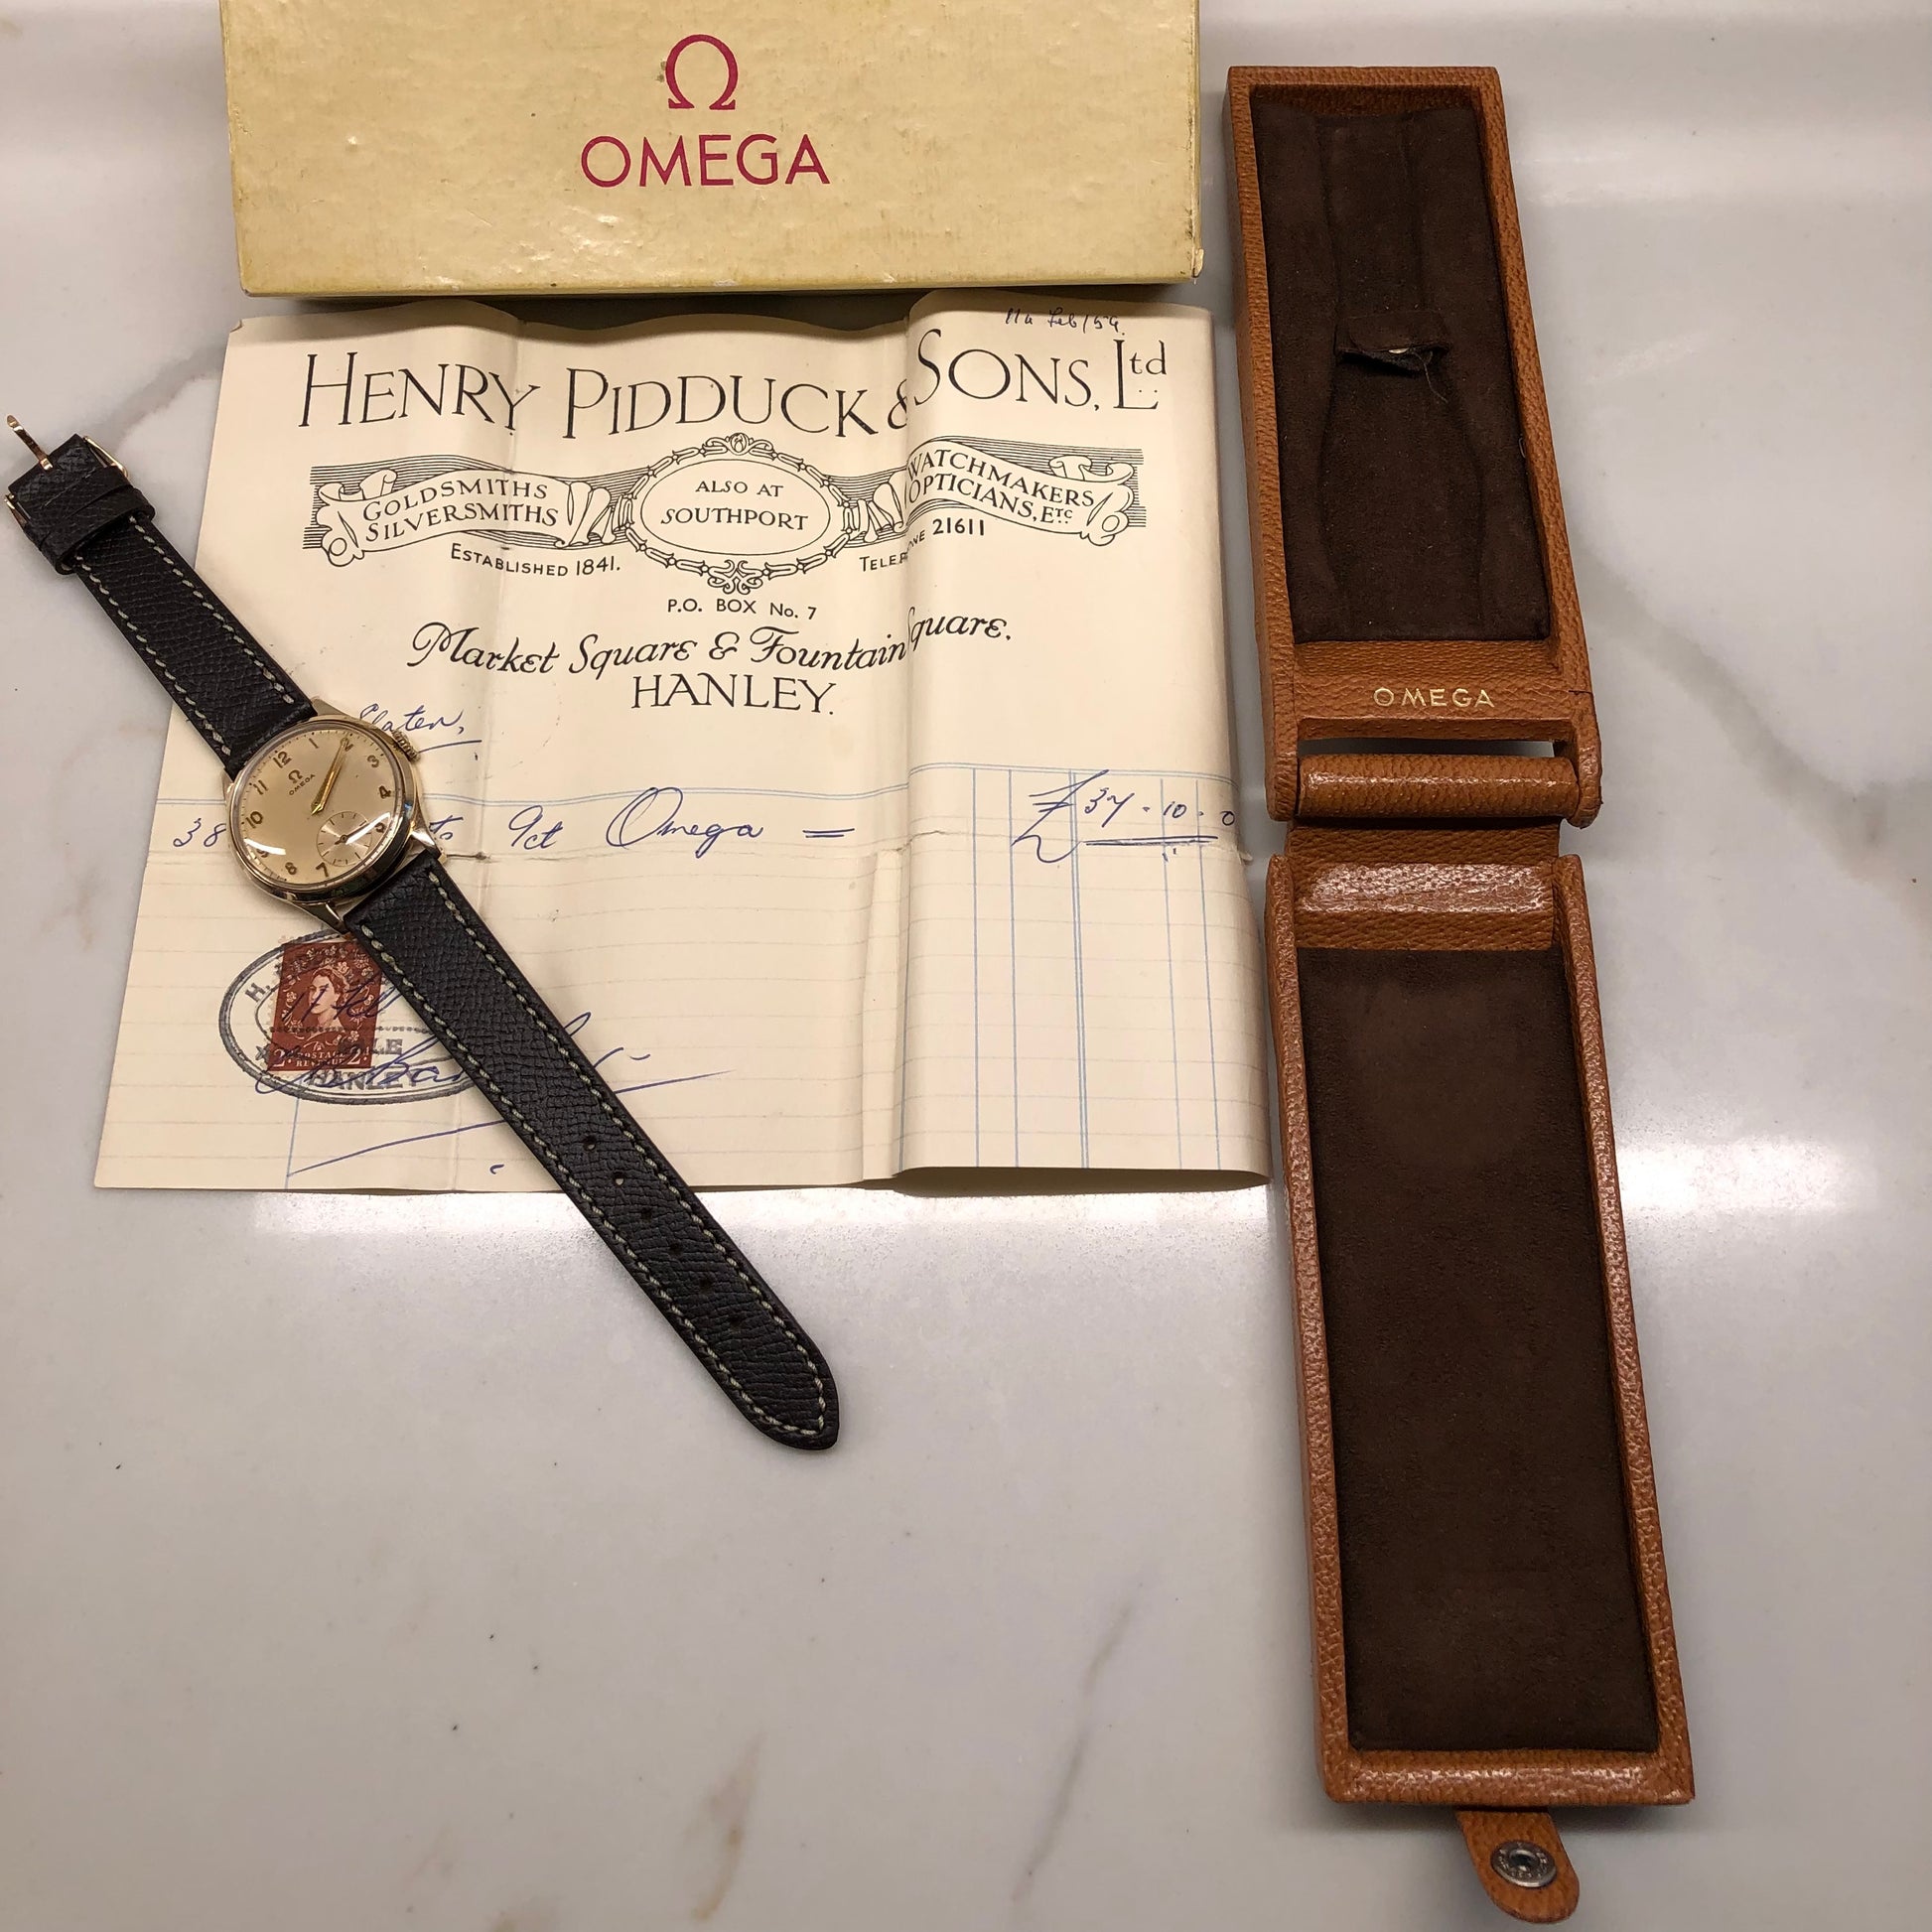 1954 Vintage Omega 9k Gold Made in England Arabic Dial Wristwatch with Original Box and Receipt - Hashtag Watch Company